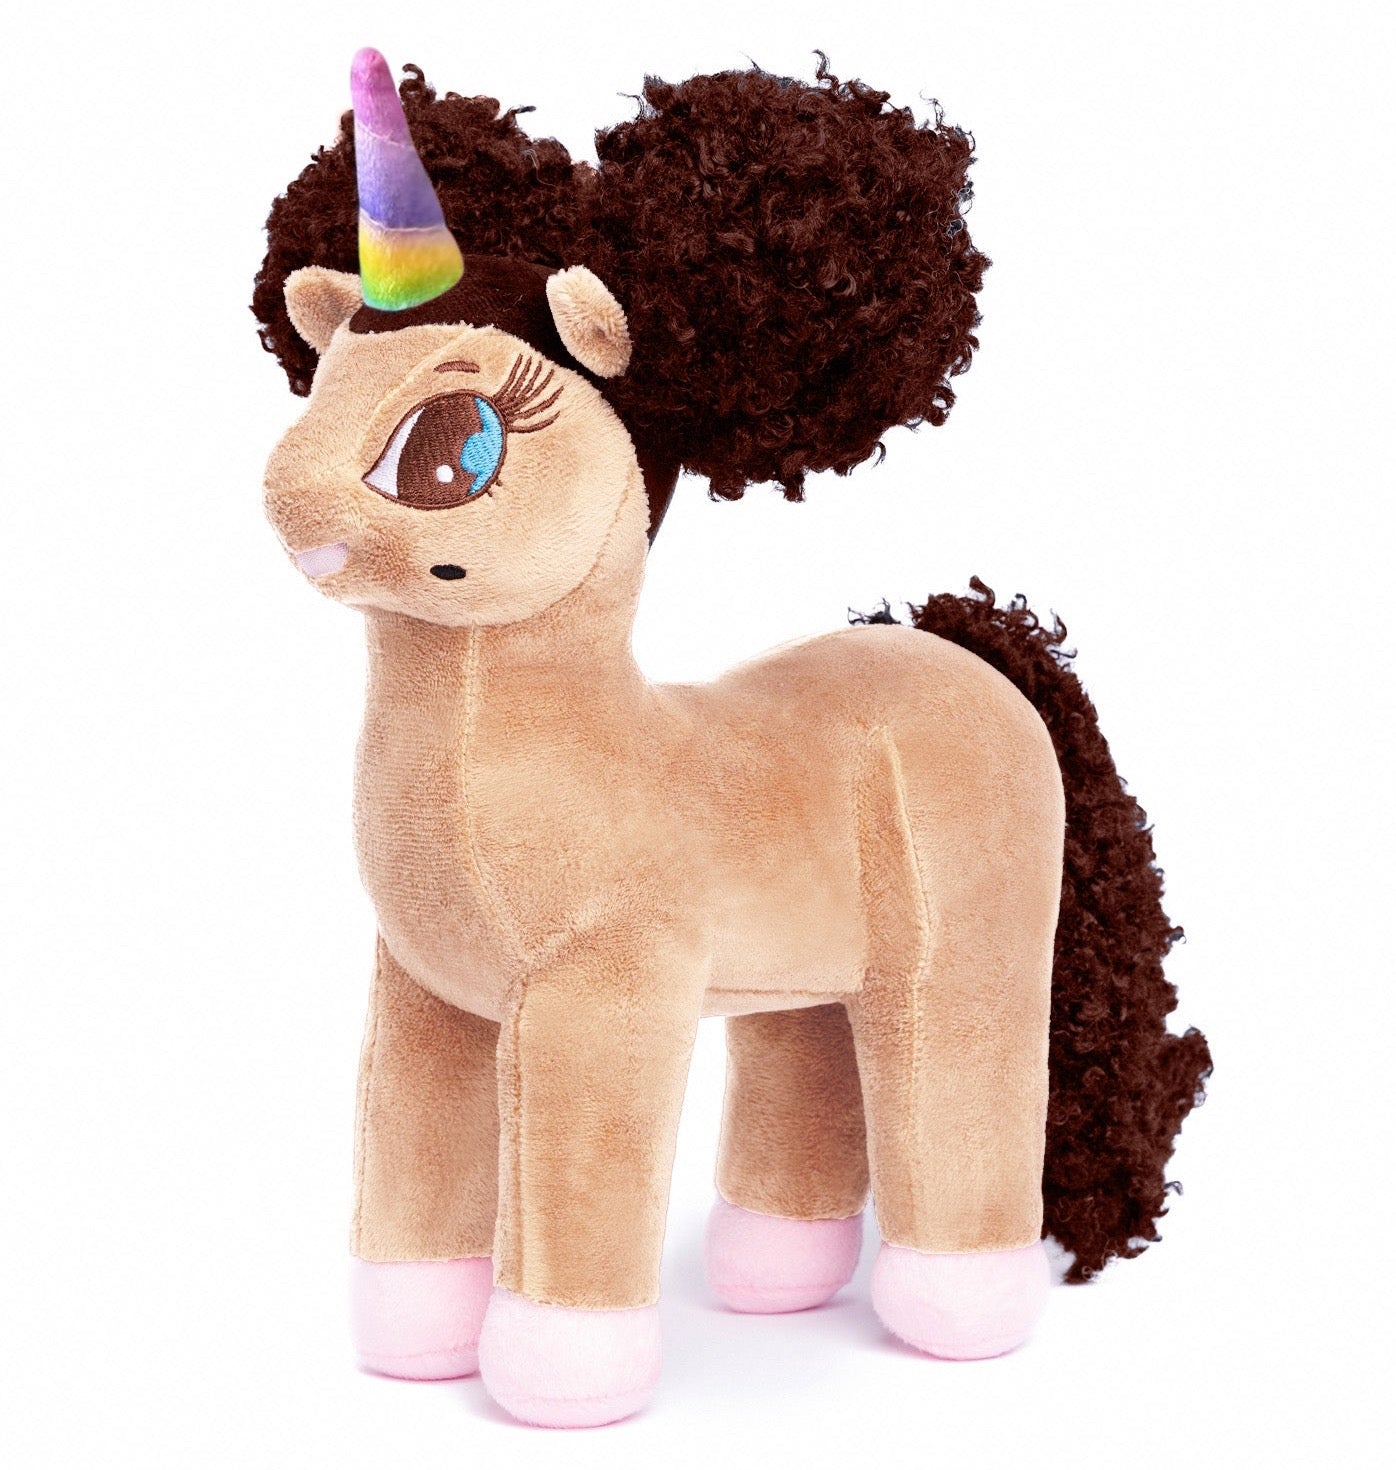 Guadalupe Unicorn Plush Toy with Afro Puffs - 12 inch